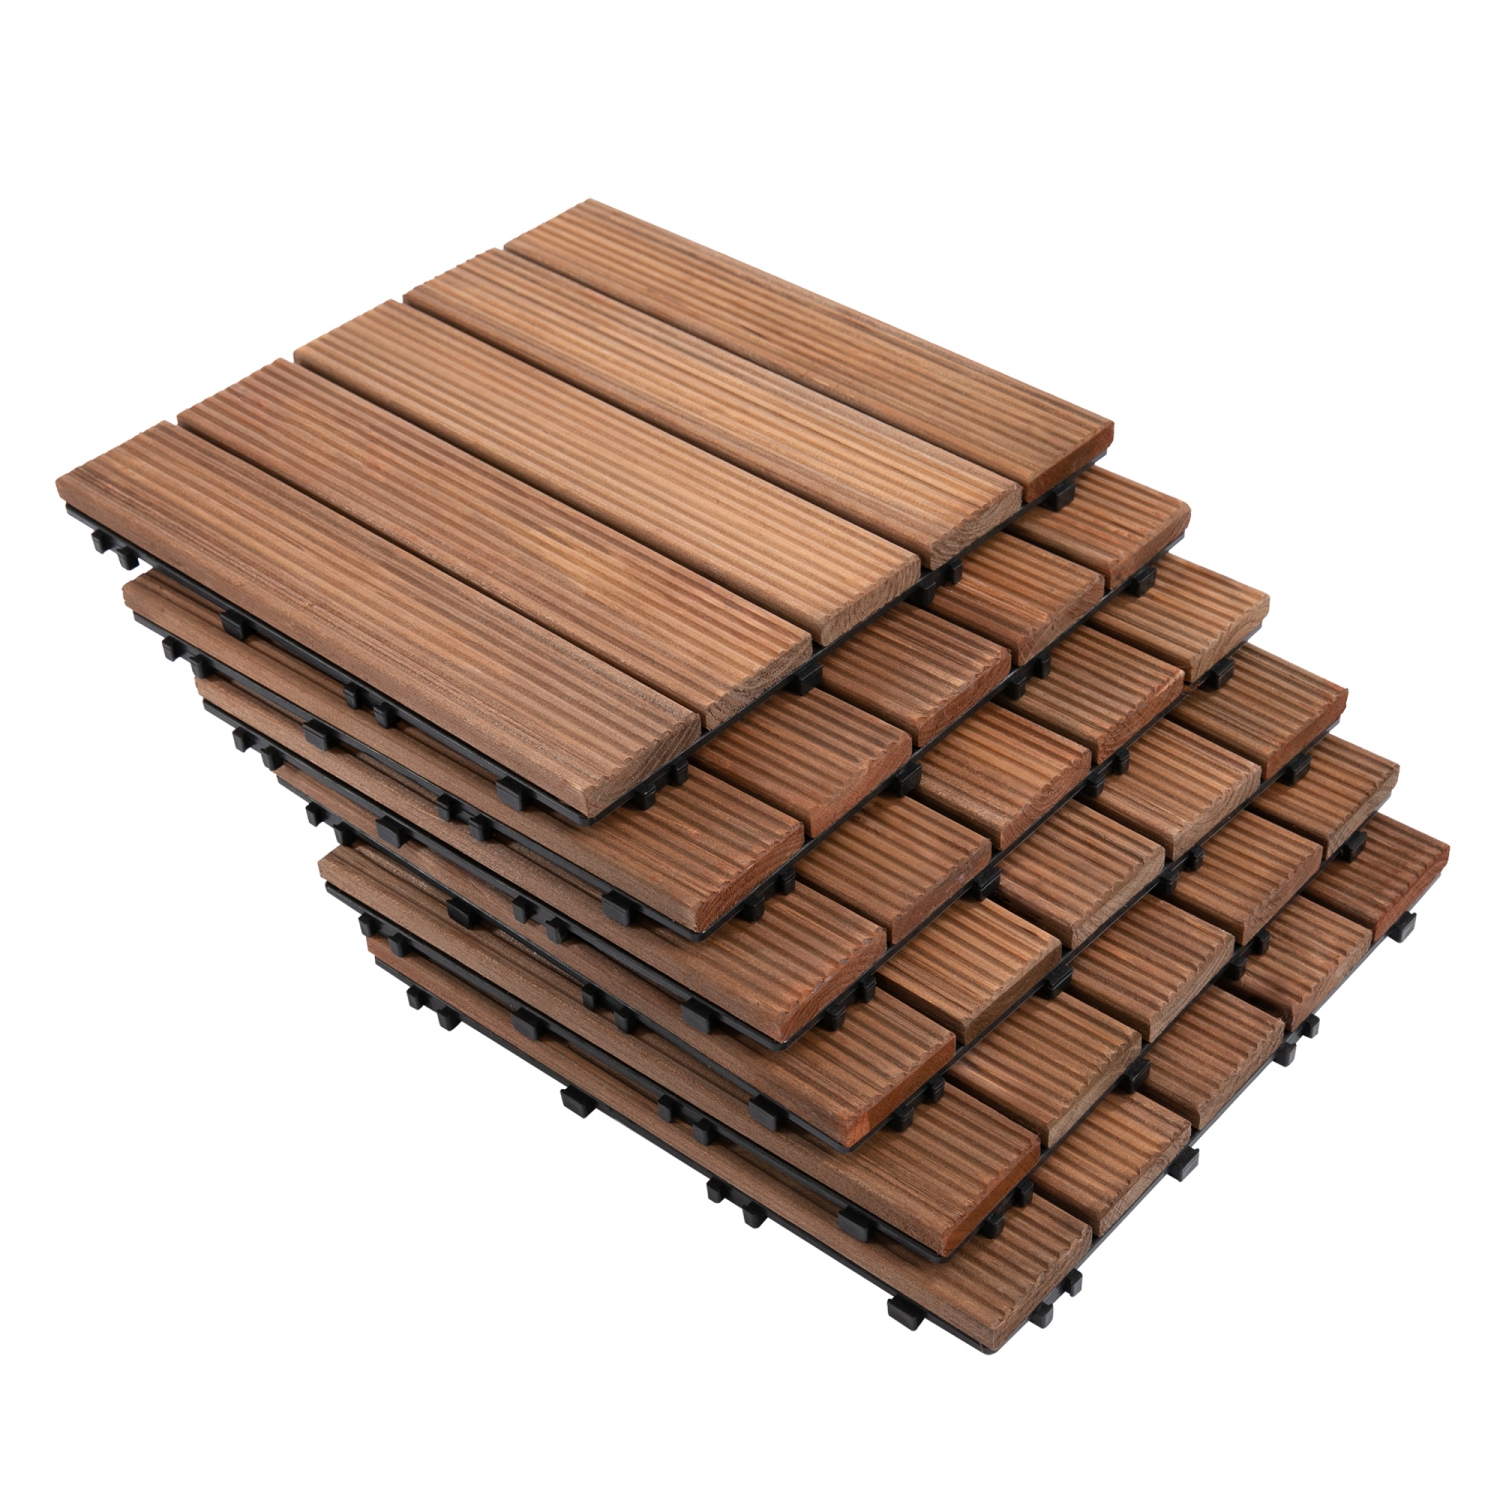 Outsunny 27 Pcs Wood Interlocking Deck Tiles, 12 x 12in Outdoor Flooring Tiles for Indoor and Outdoor Use, Tools Free Assembly, Brown